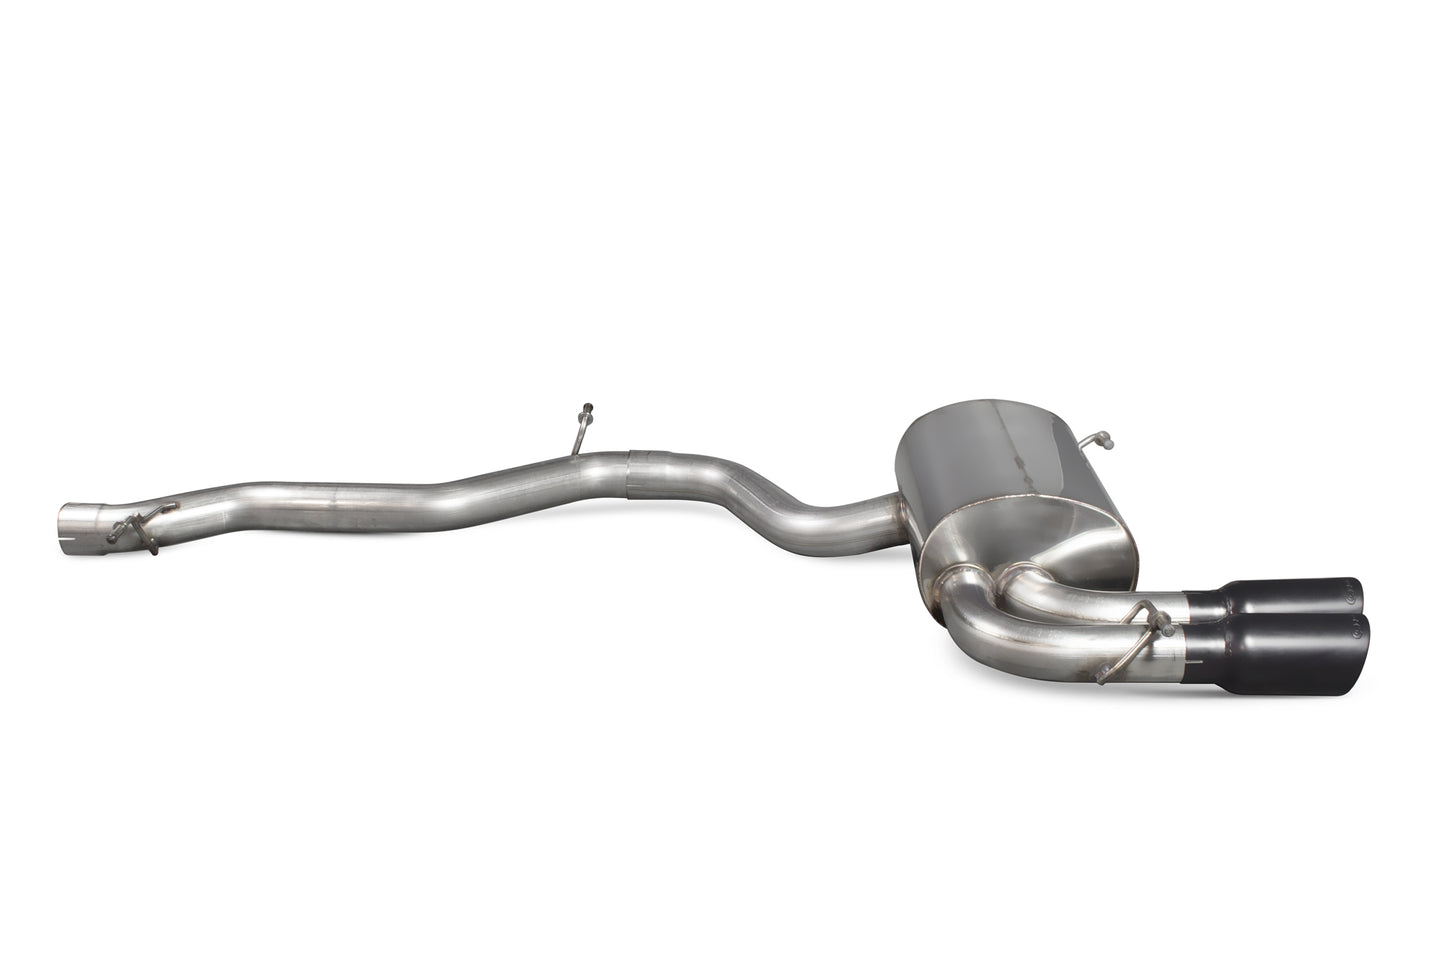 Scorpion Non-Res Cat Back Exhaust (Black Tail Pipes) - Audi S3 8P (06-12)